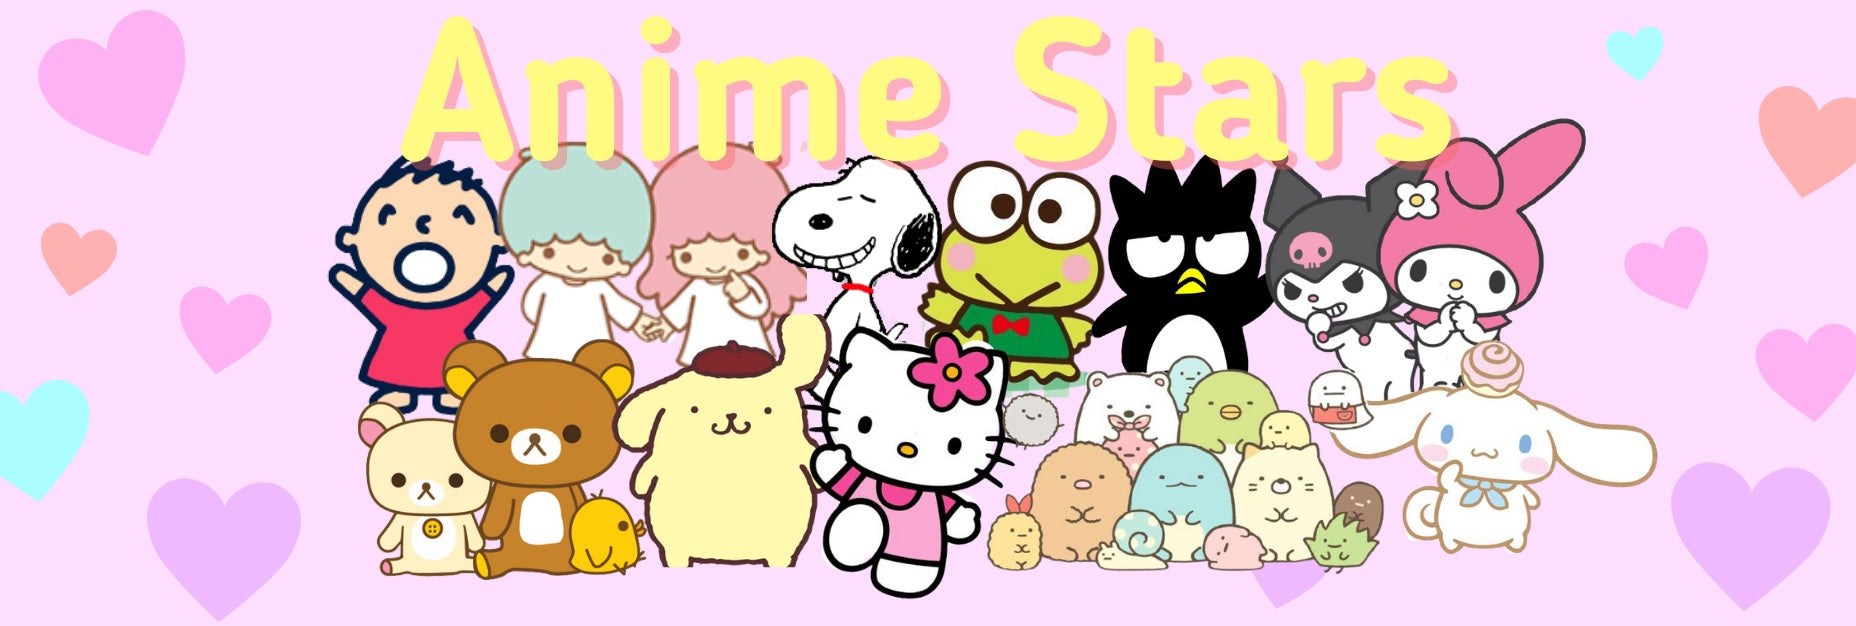 Anime Stars A Cute Shop - Inspired by You. For The Cute Soul. 